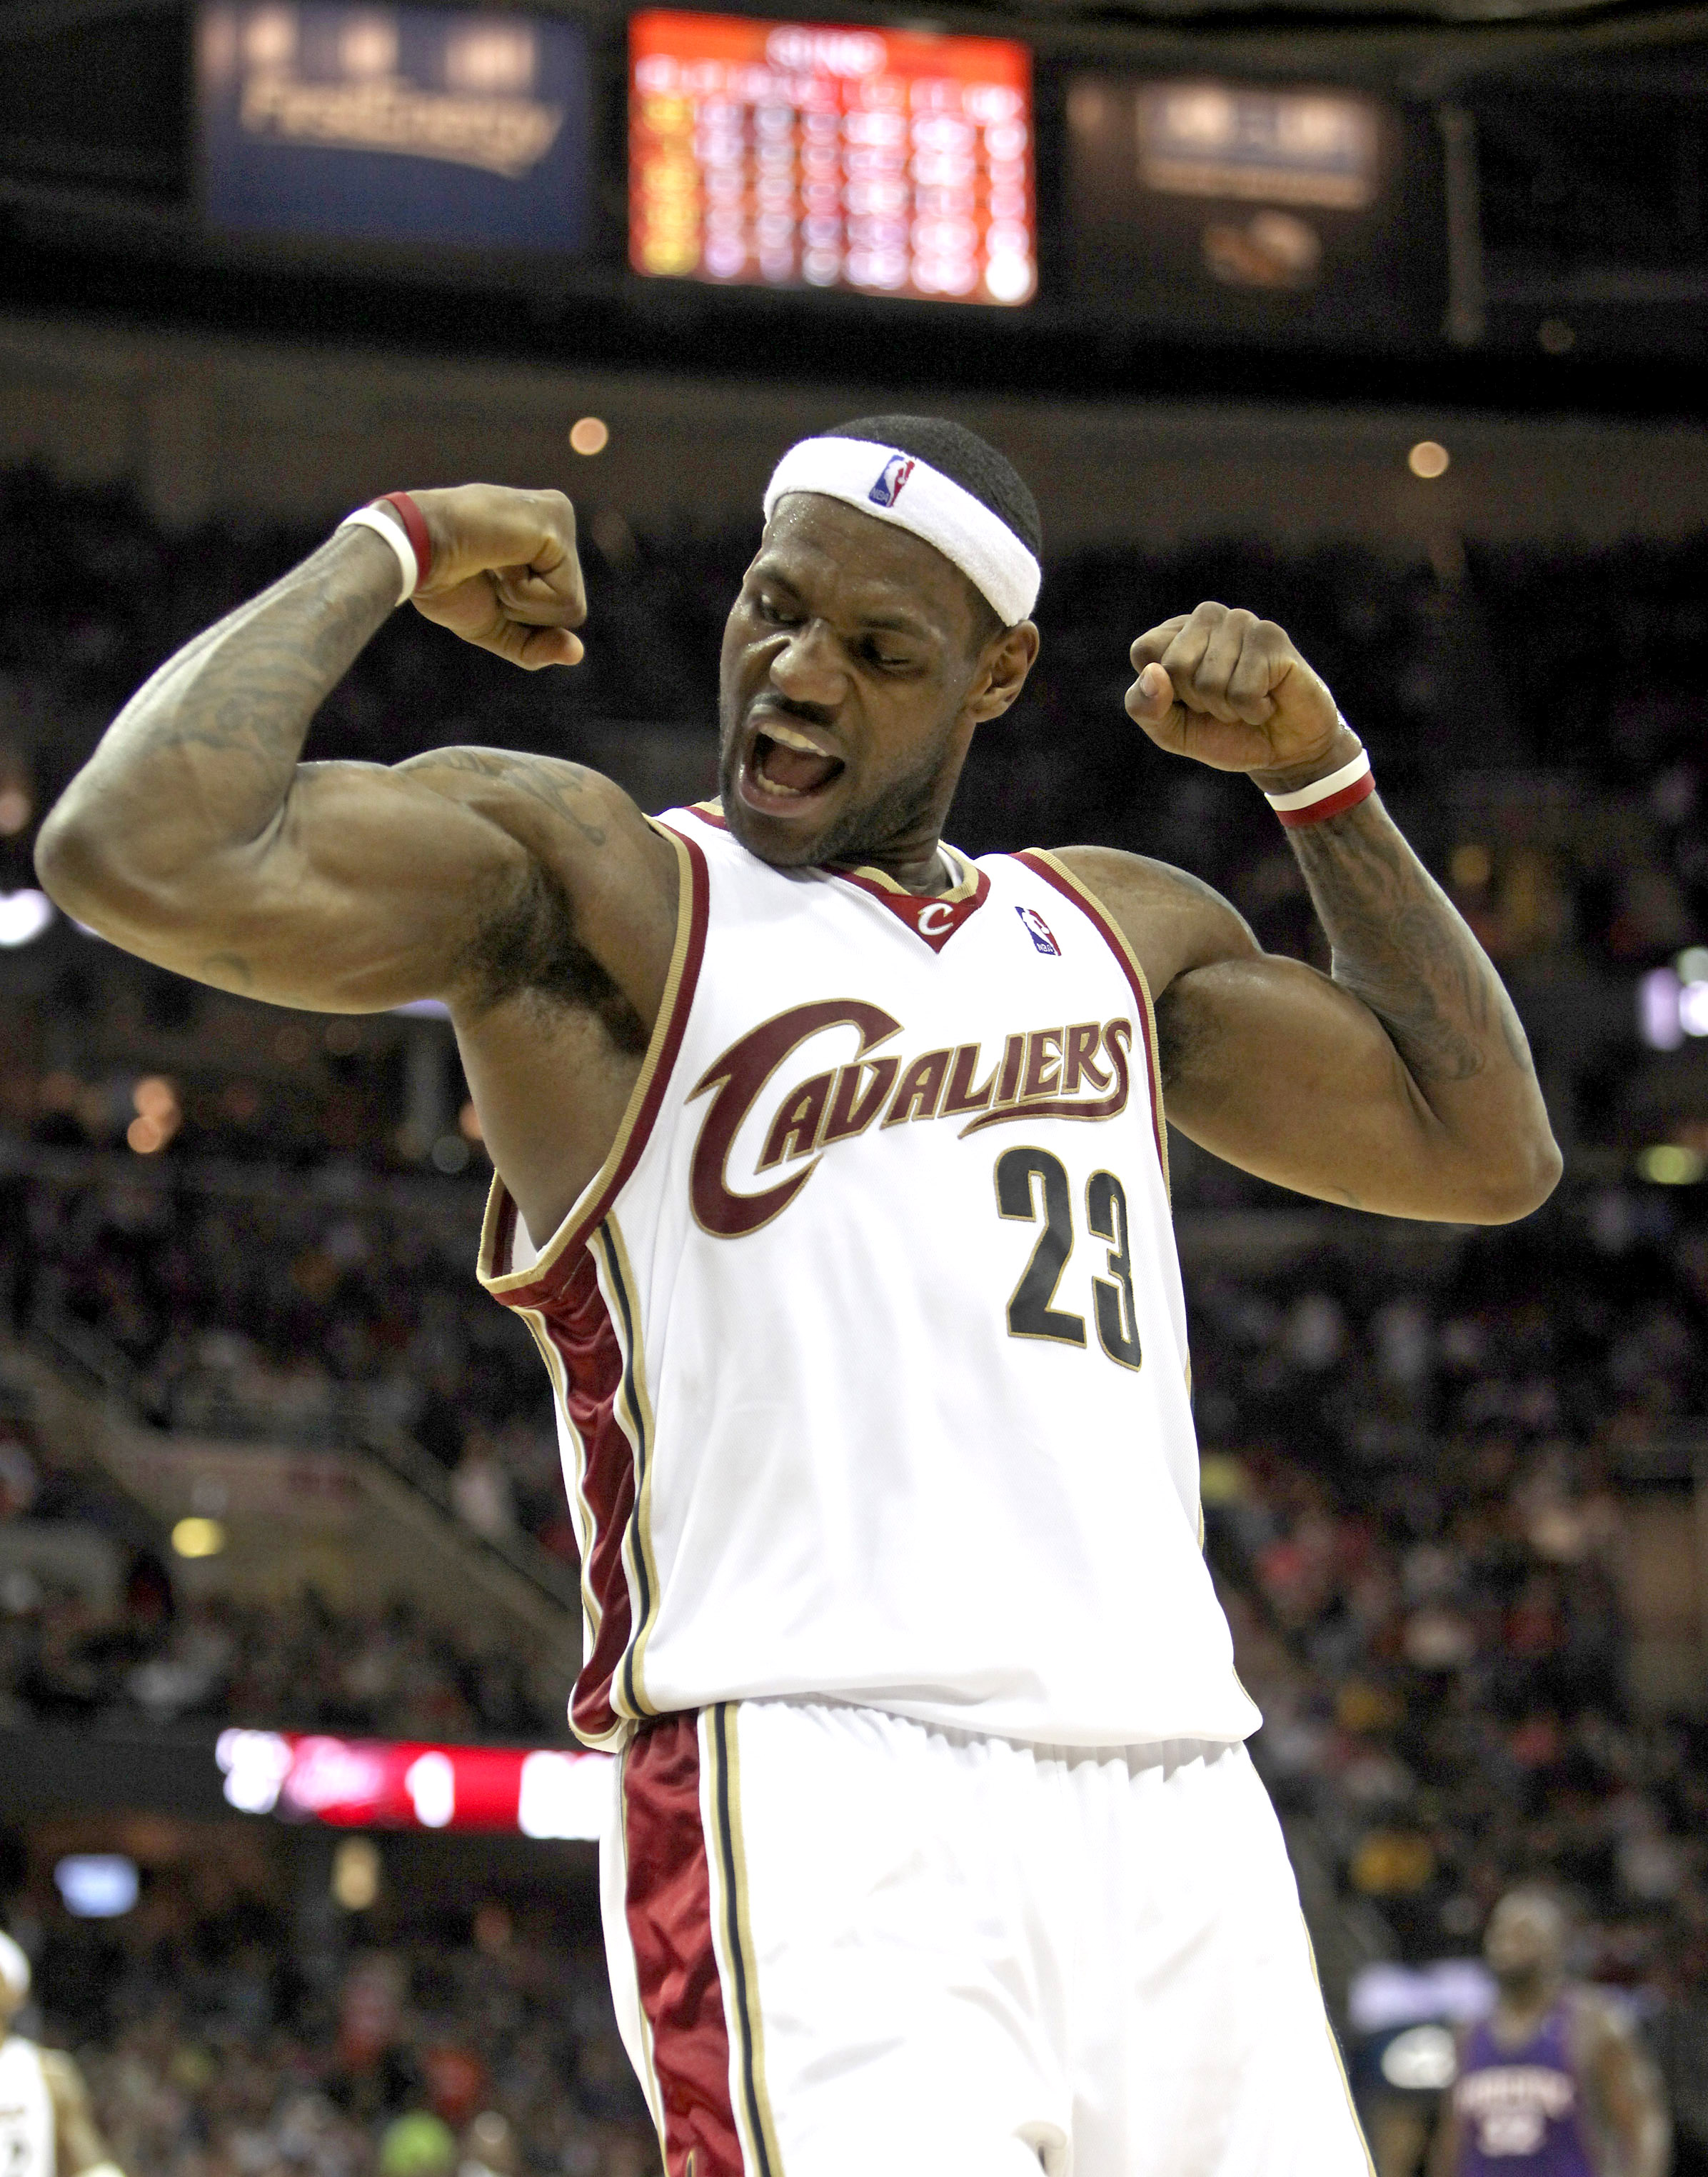 Cleveland Cavaliers' LeBron James flexes after taking a hard foul by Phoenix Suns' Jason Richardson and making the shot in the second quarter Wednesday, February 11, 2009 at Quicken Loans arena in Cleveland.  (Joshua Gunter/ The Plain Dealer)